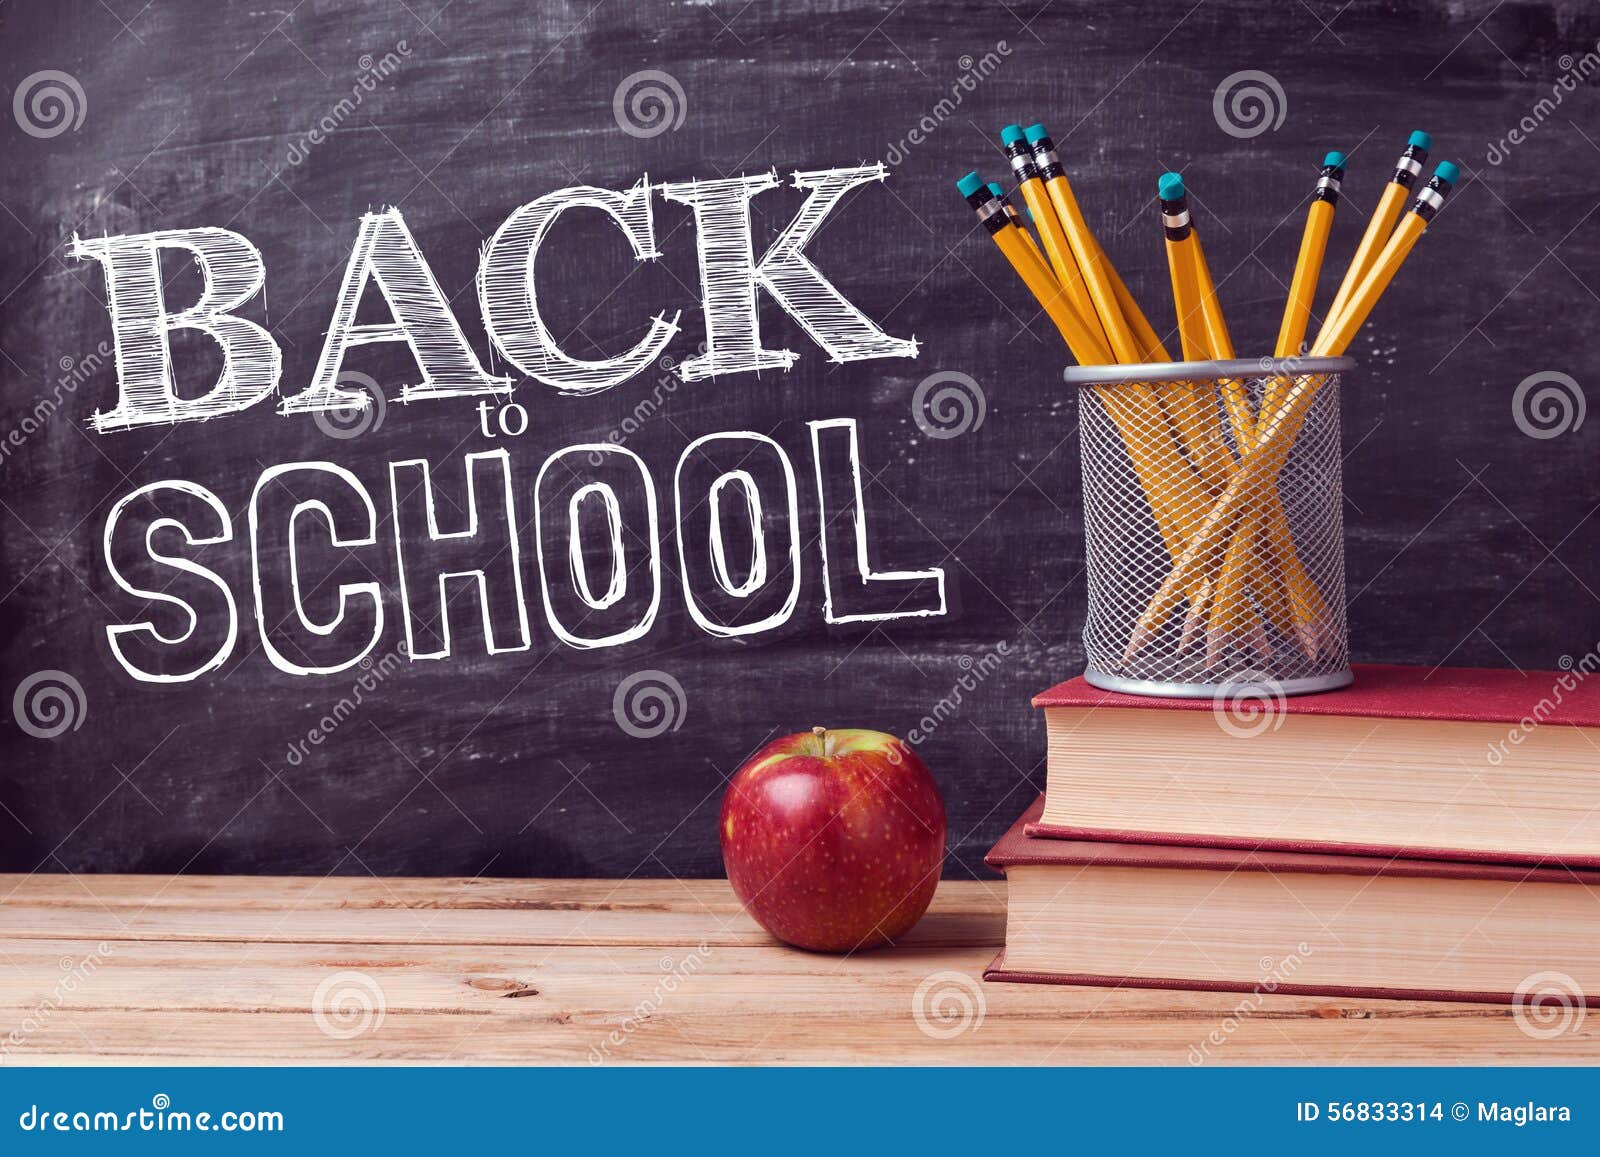 back to school lettering with books, pencils and apple over chalkboard background